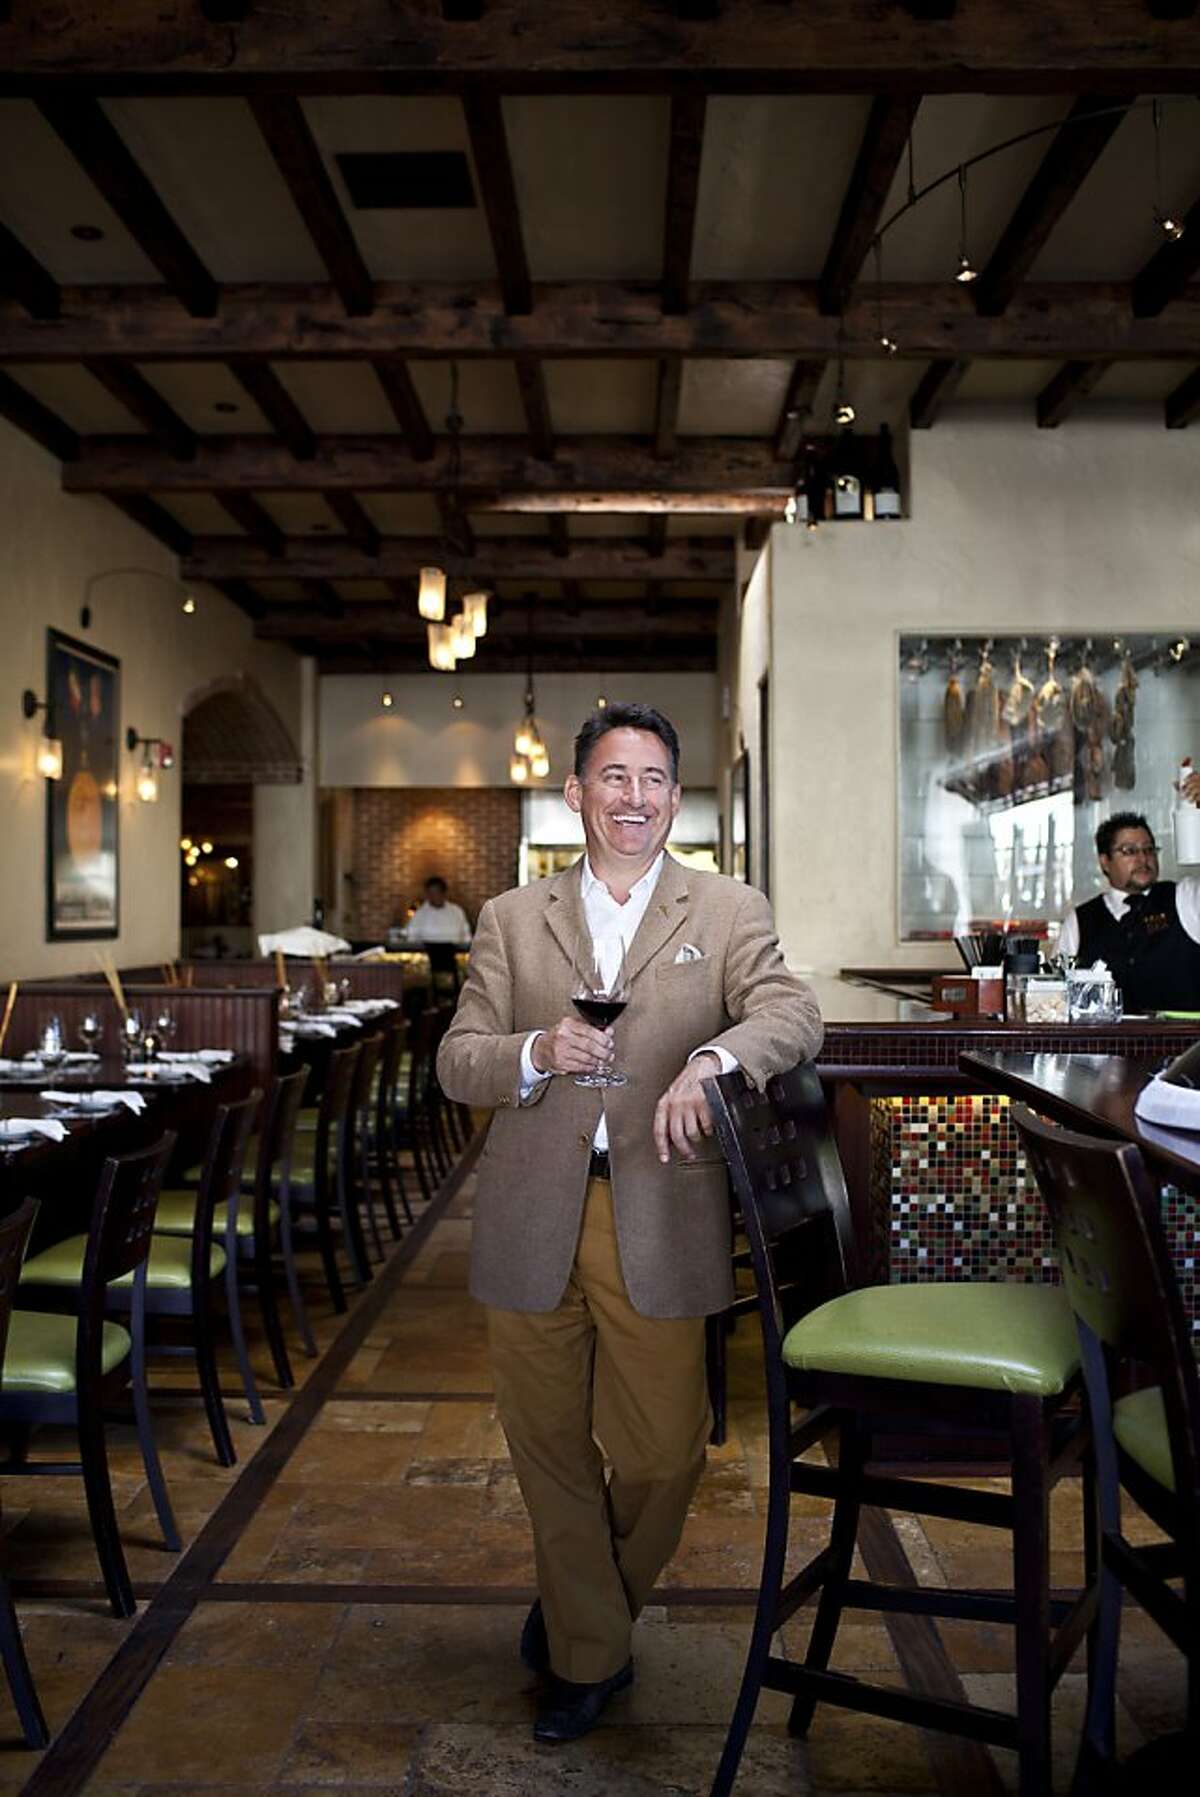 David Fink, founder and chief executive officer of Mirabel Hotel and Restaurant Group, at Cantinetta Luca, one of his restaurants, in Carmel, Calif., Friday, September 7, 2012.